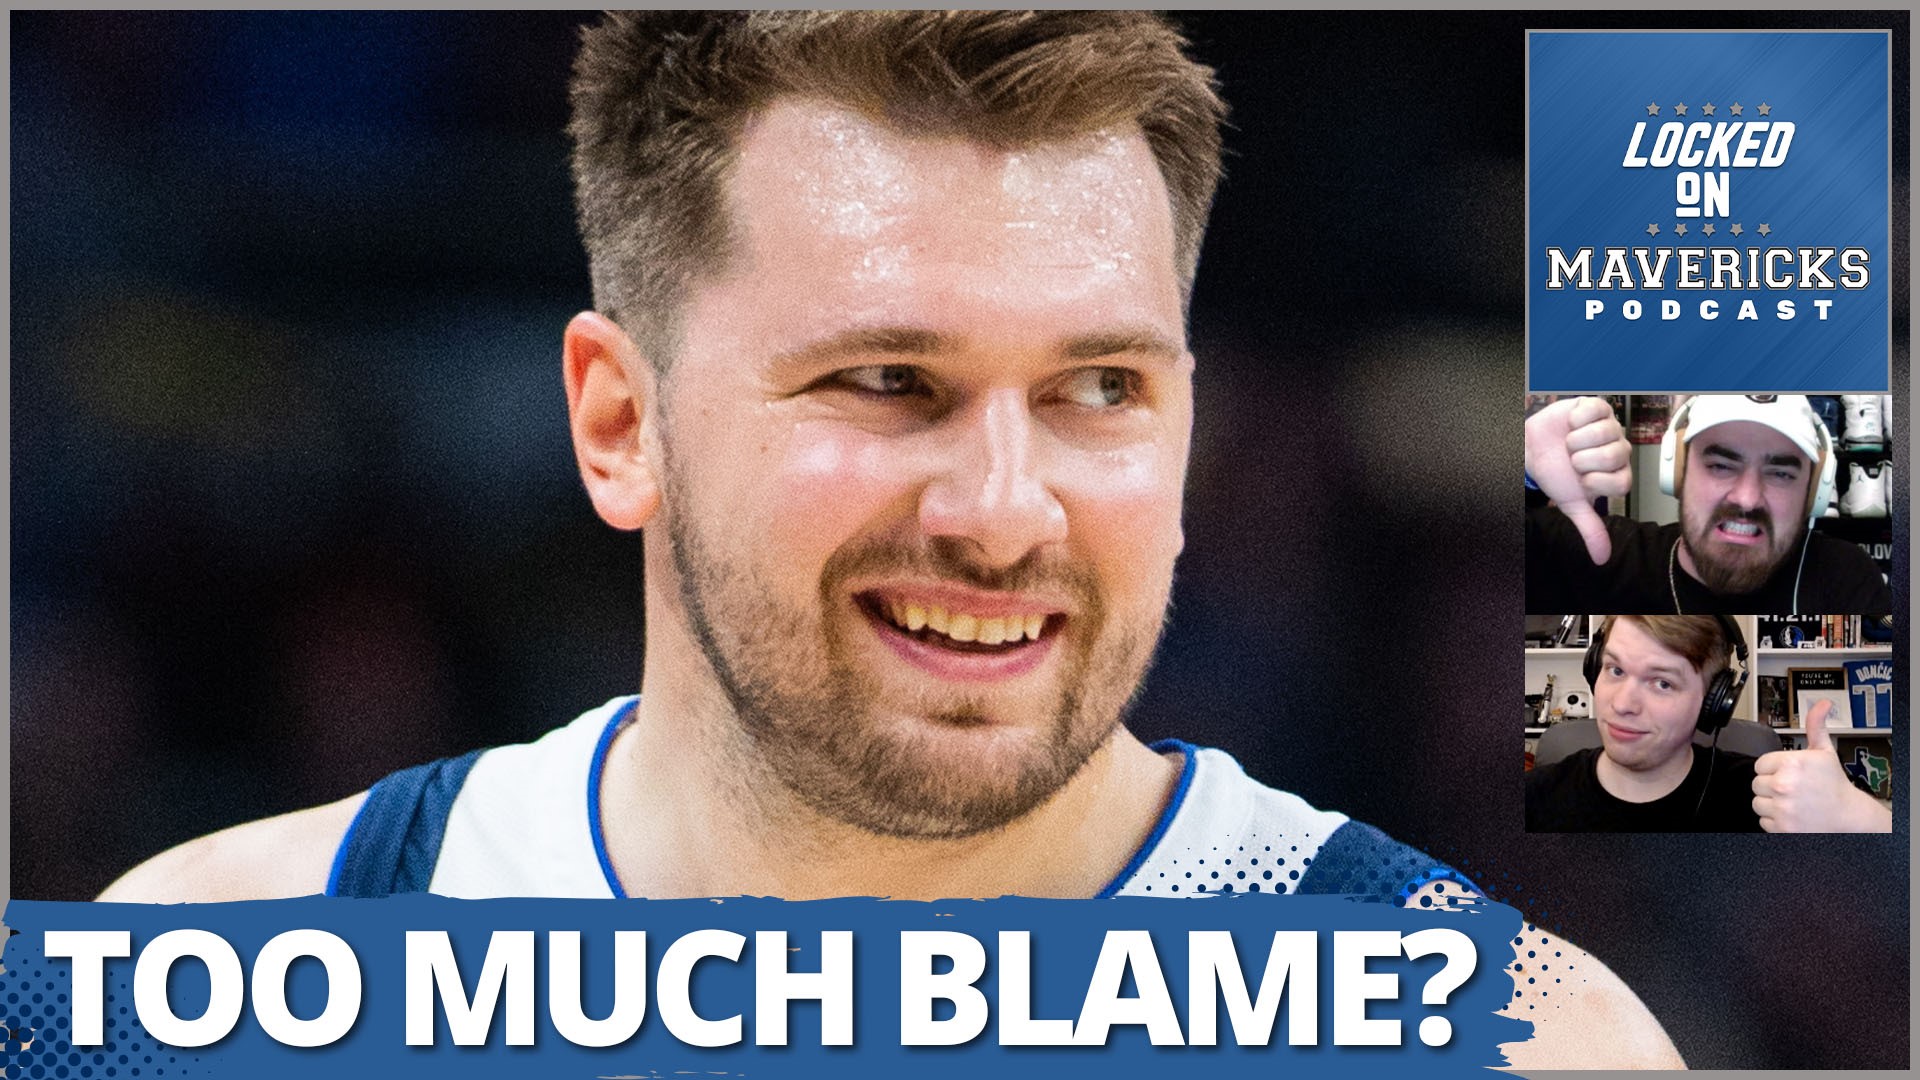 Nick Angstadt & Isaac Harris discuss the media attention the Mavs current disaster has gotten and discuss how much blame Luka Doncic should be getting?